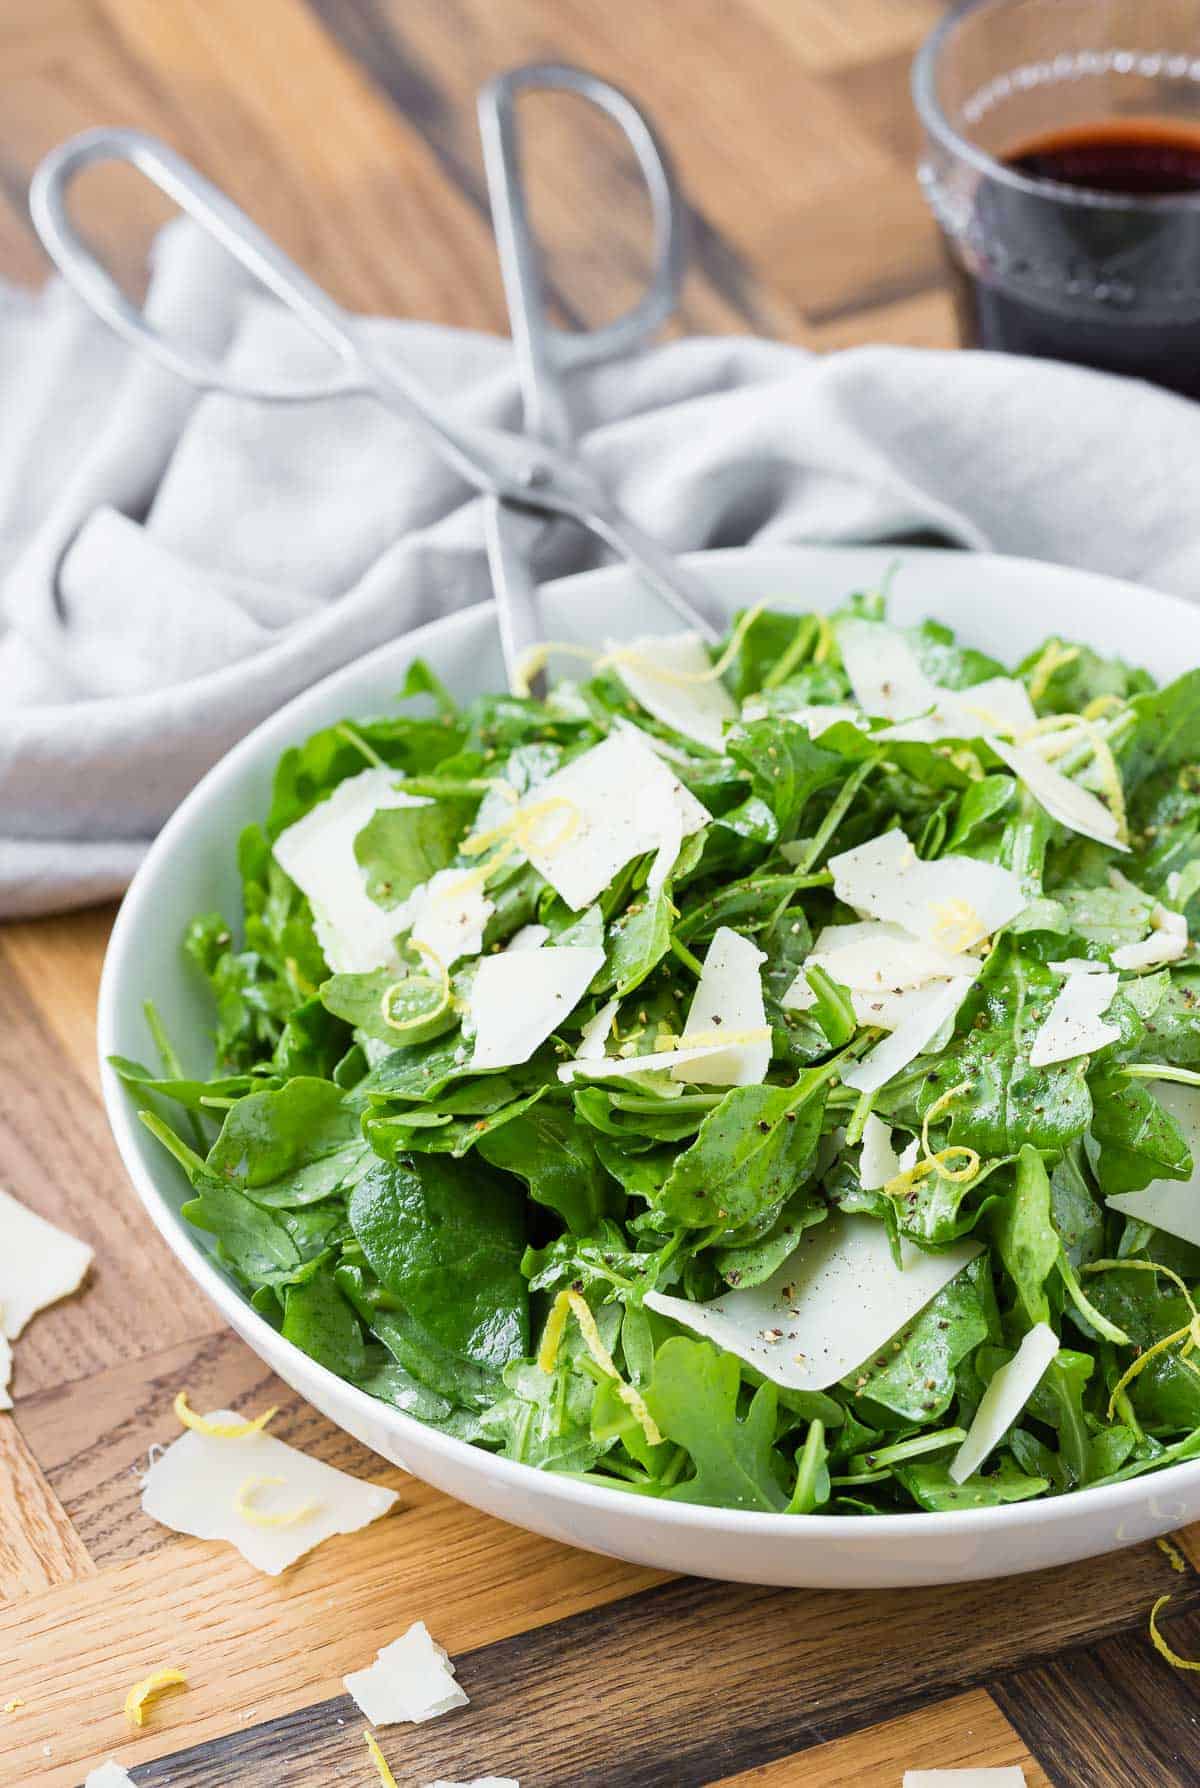 Arugula, parmesan, and lemon zest in a white bowl on a wooden background.